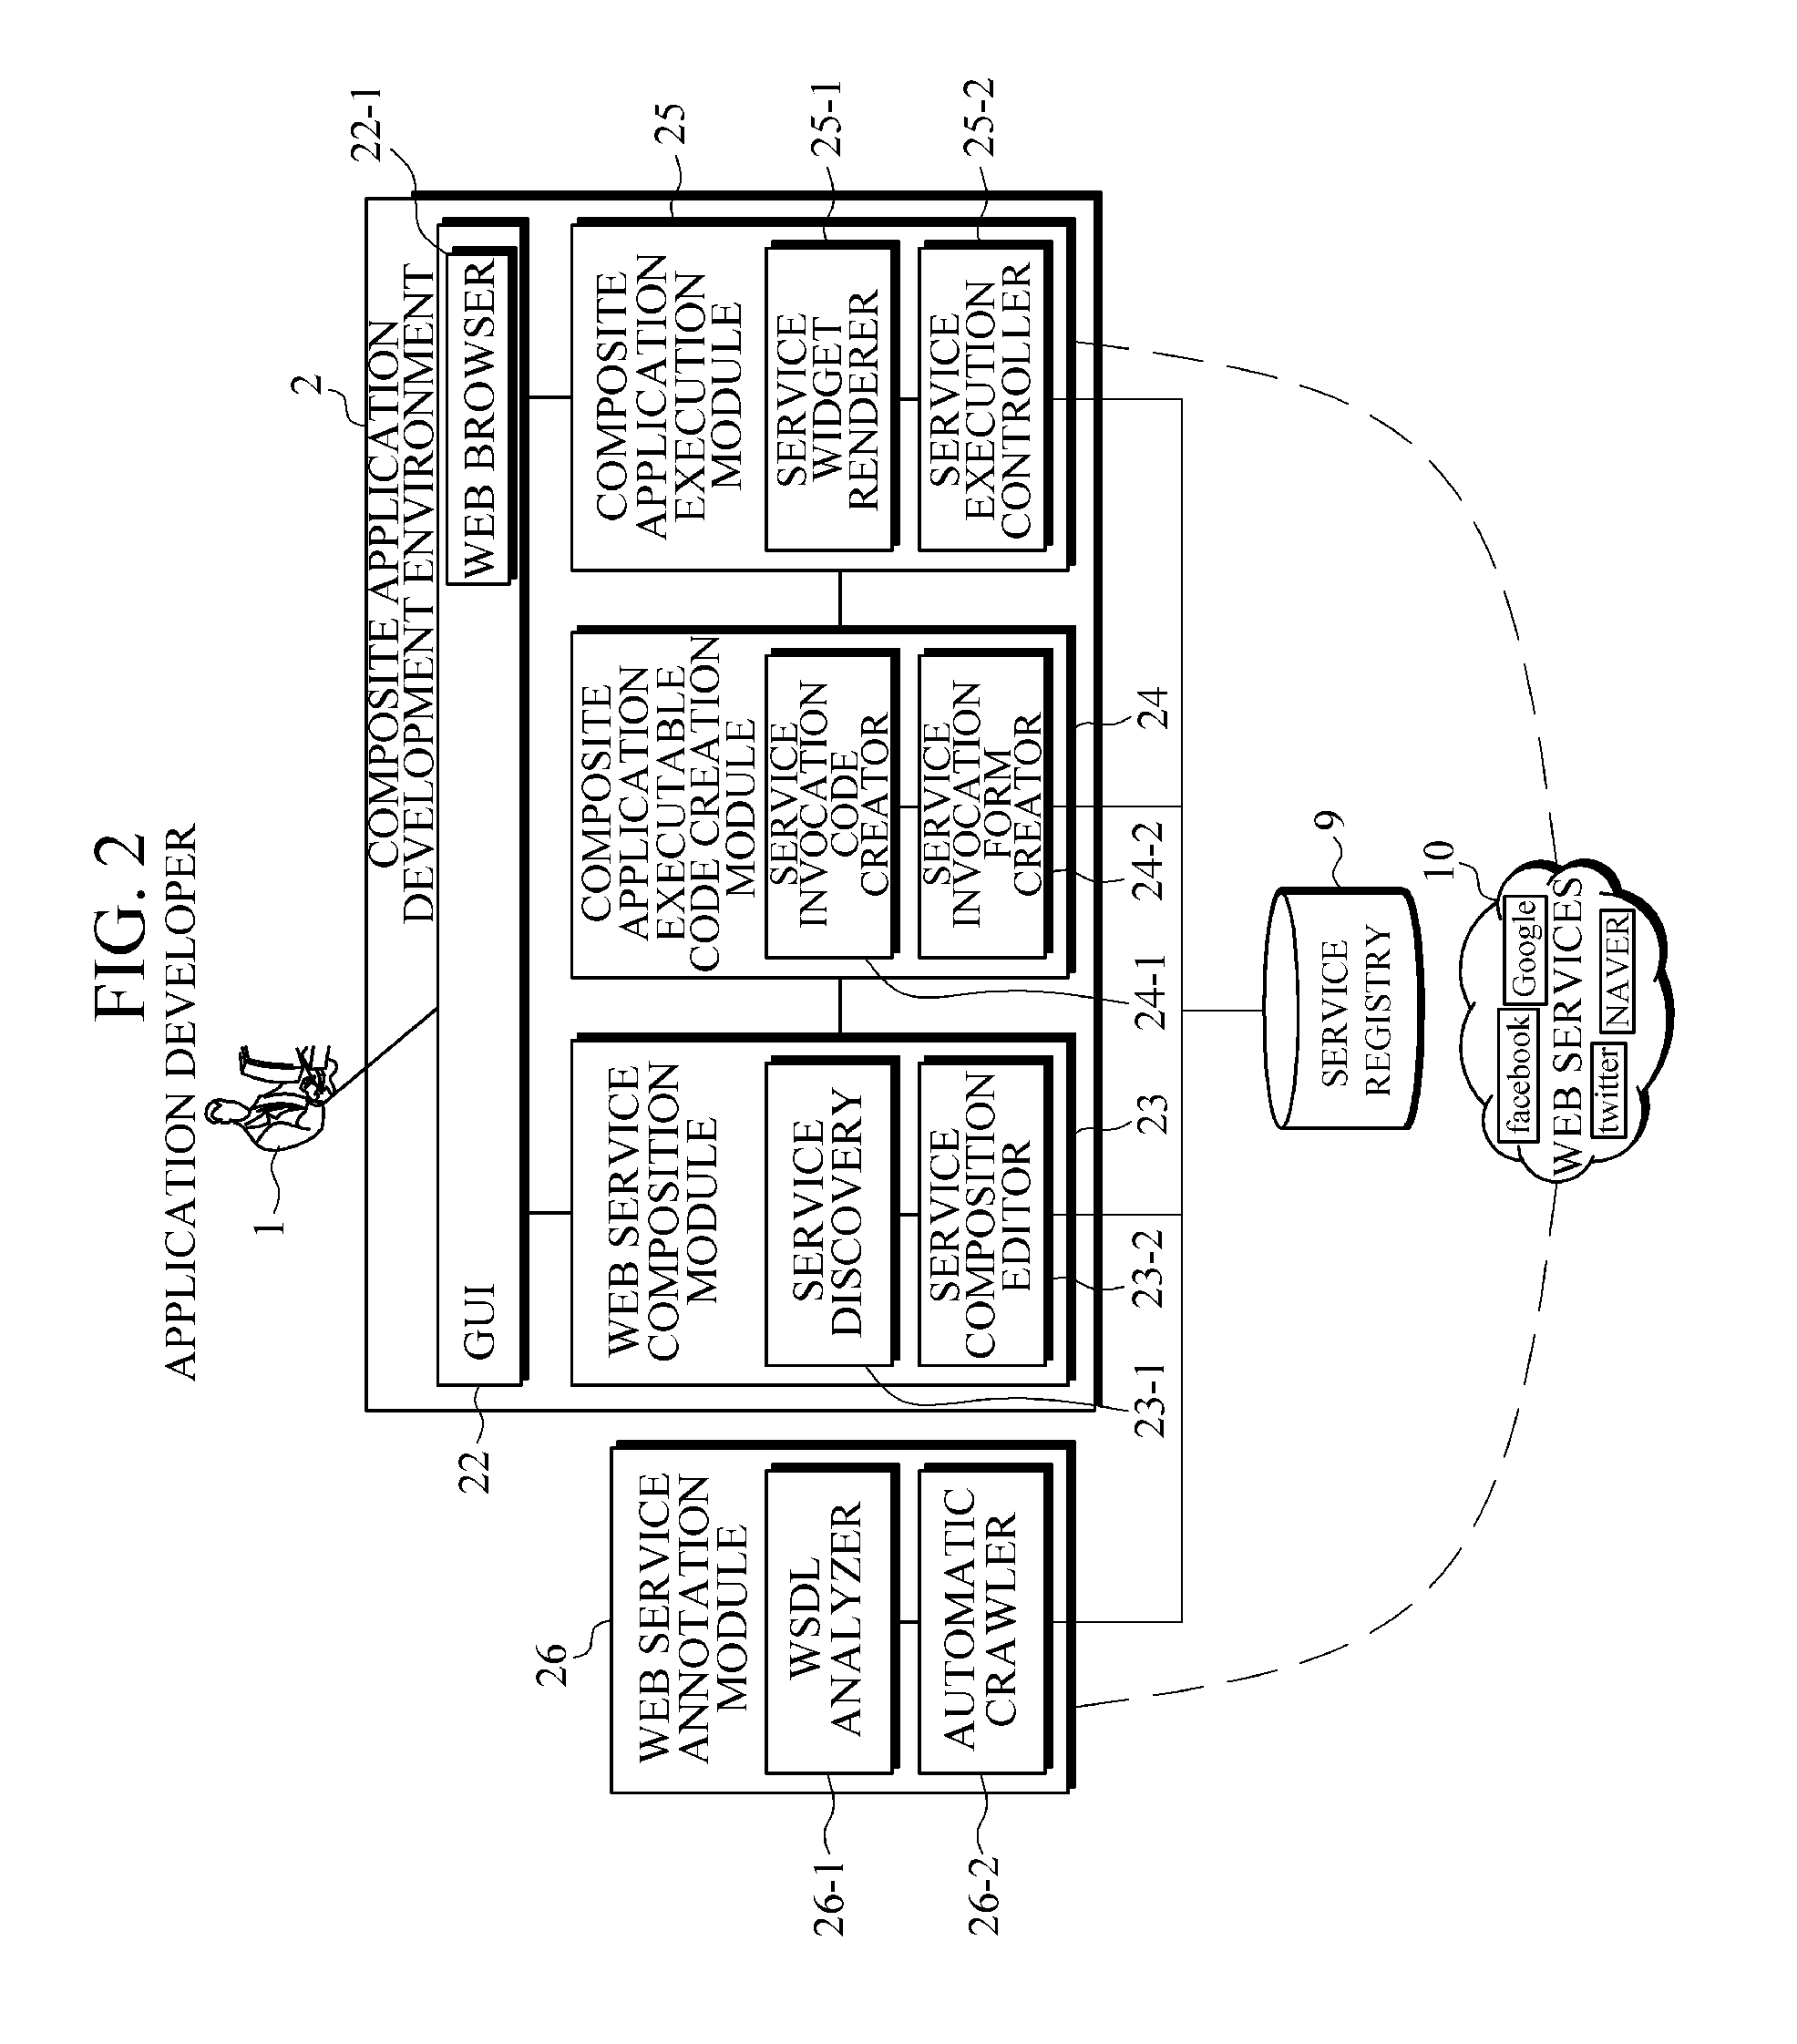 Automatic widget creation apparatus and method for invoking heterogeneous web services in a composite application